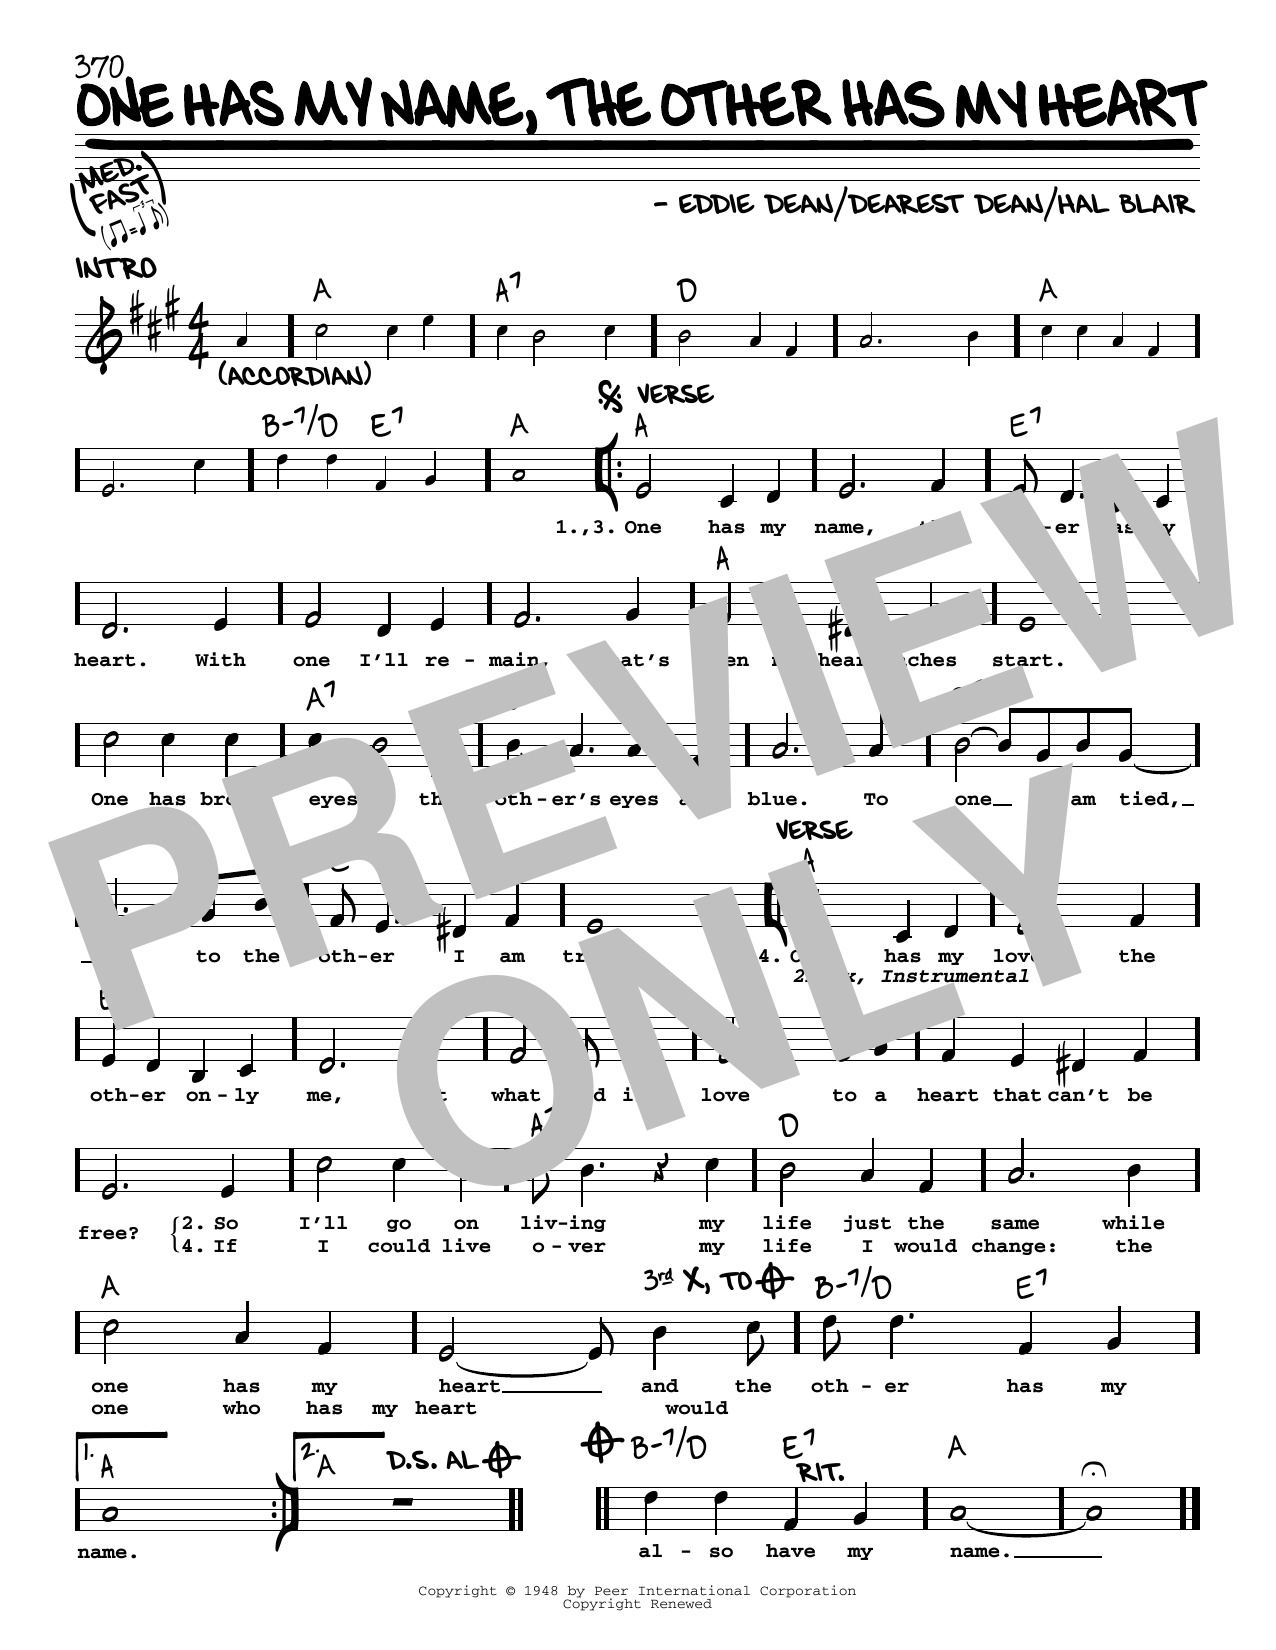 Download Jimmy Wakely One Has My Name, The Other Has My Heart Sheet Music